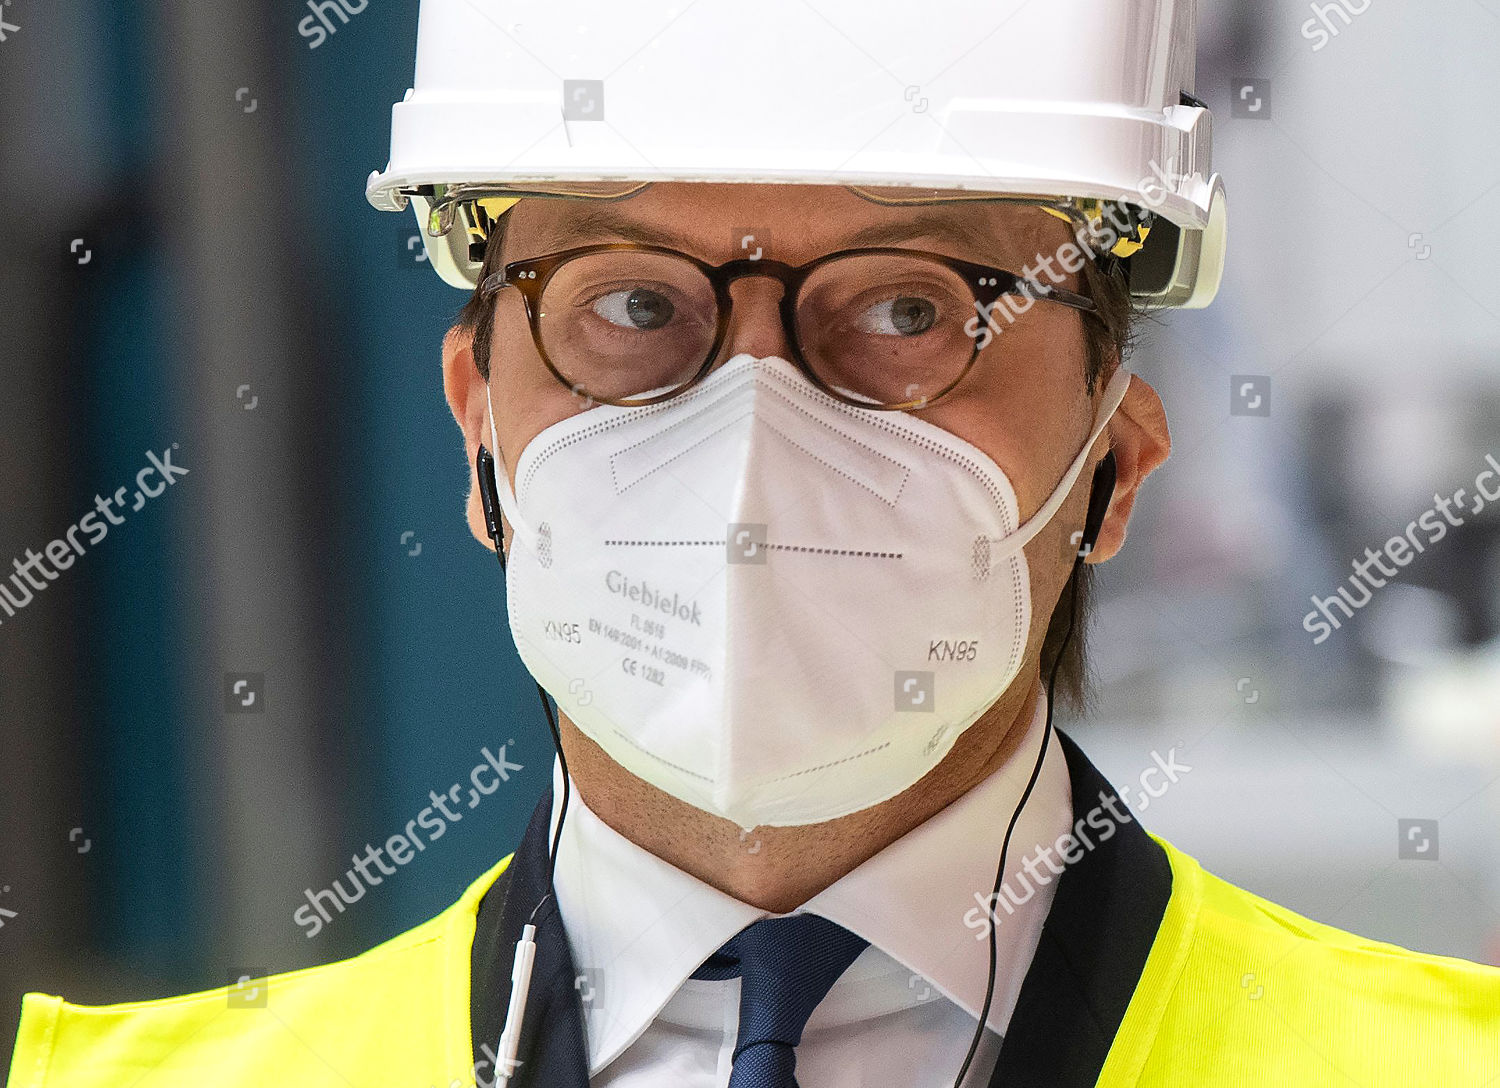 prince-daniel-visits-the-production-line-at-hitachi-abb-powergrids-ludvika-sweden-shutterstock-editorial-10784178f.jpg